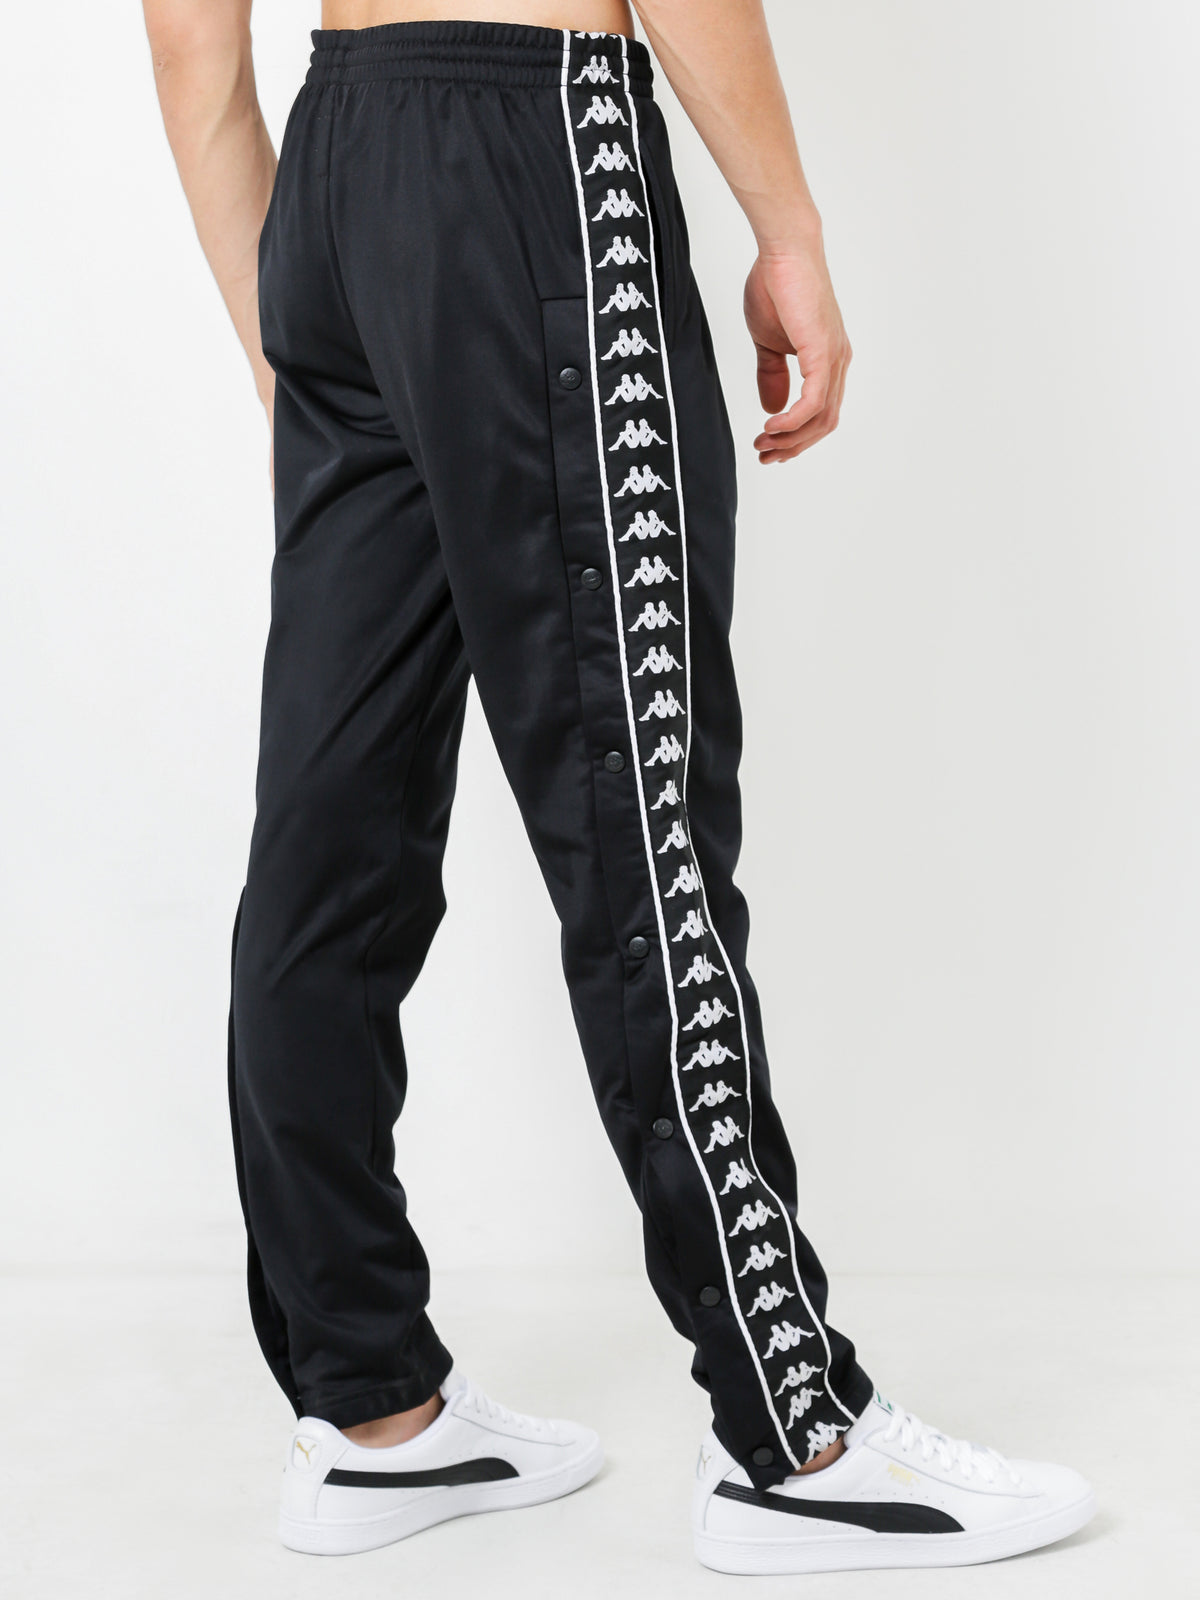 Authentic Hector Snap Pants in Black